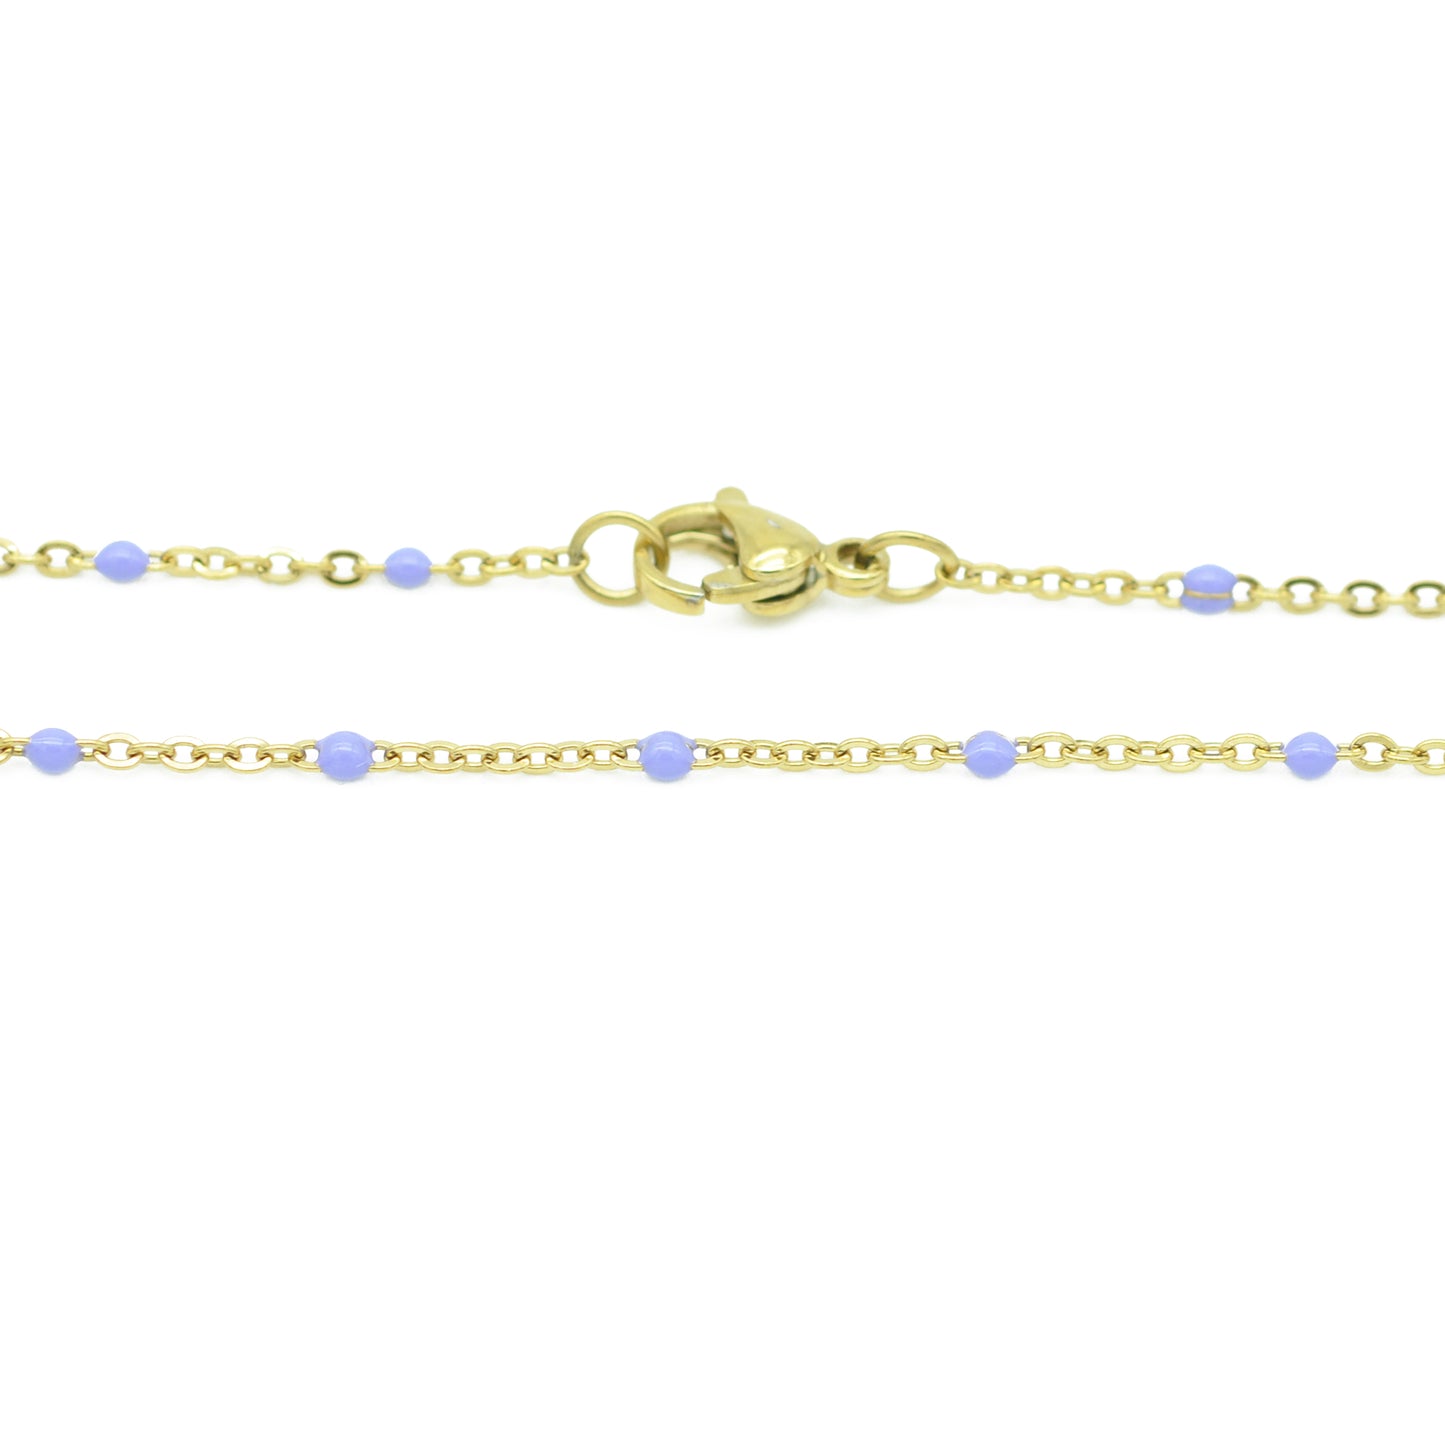 Stainless steel chain with beads / violet enamelled / gold plated / 45 cm